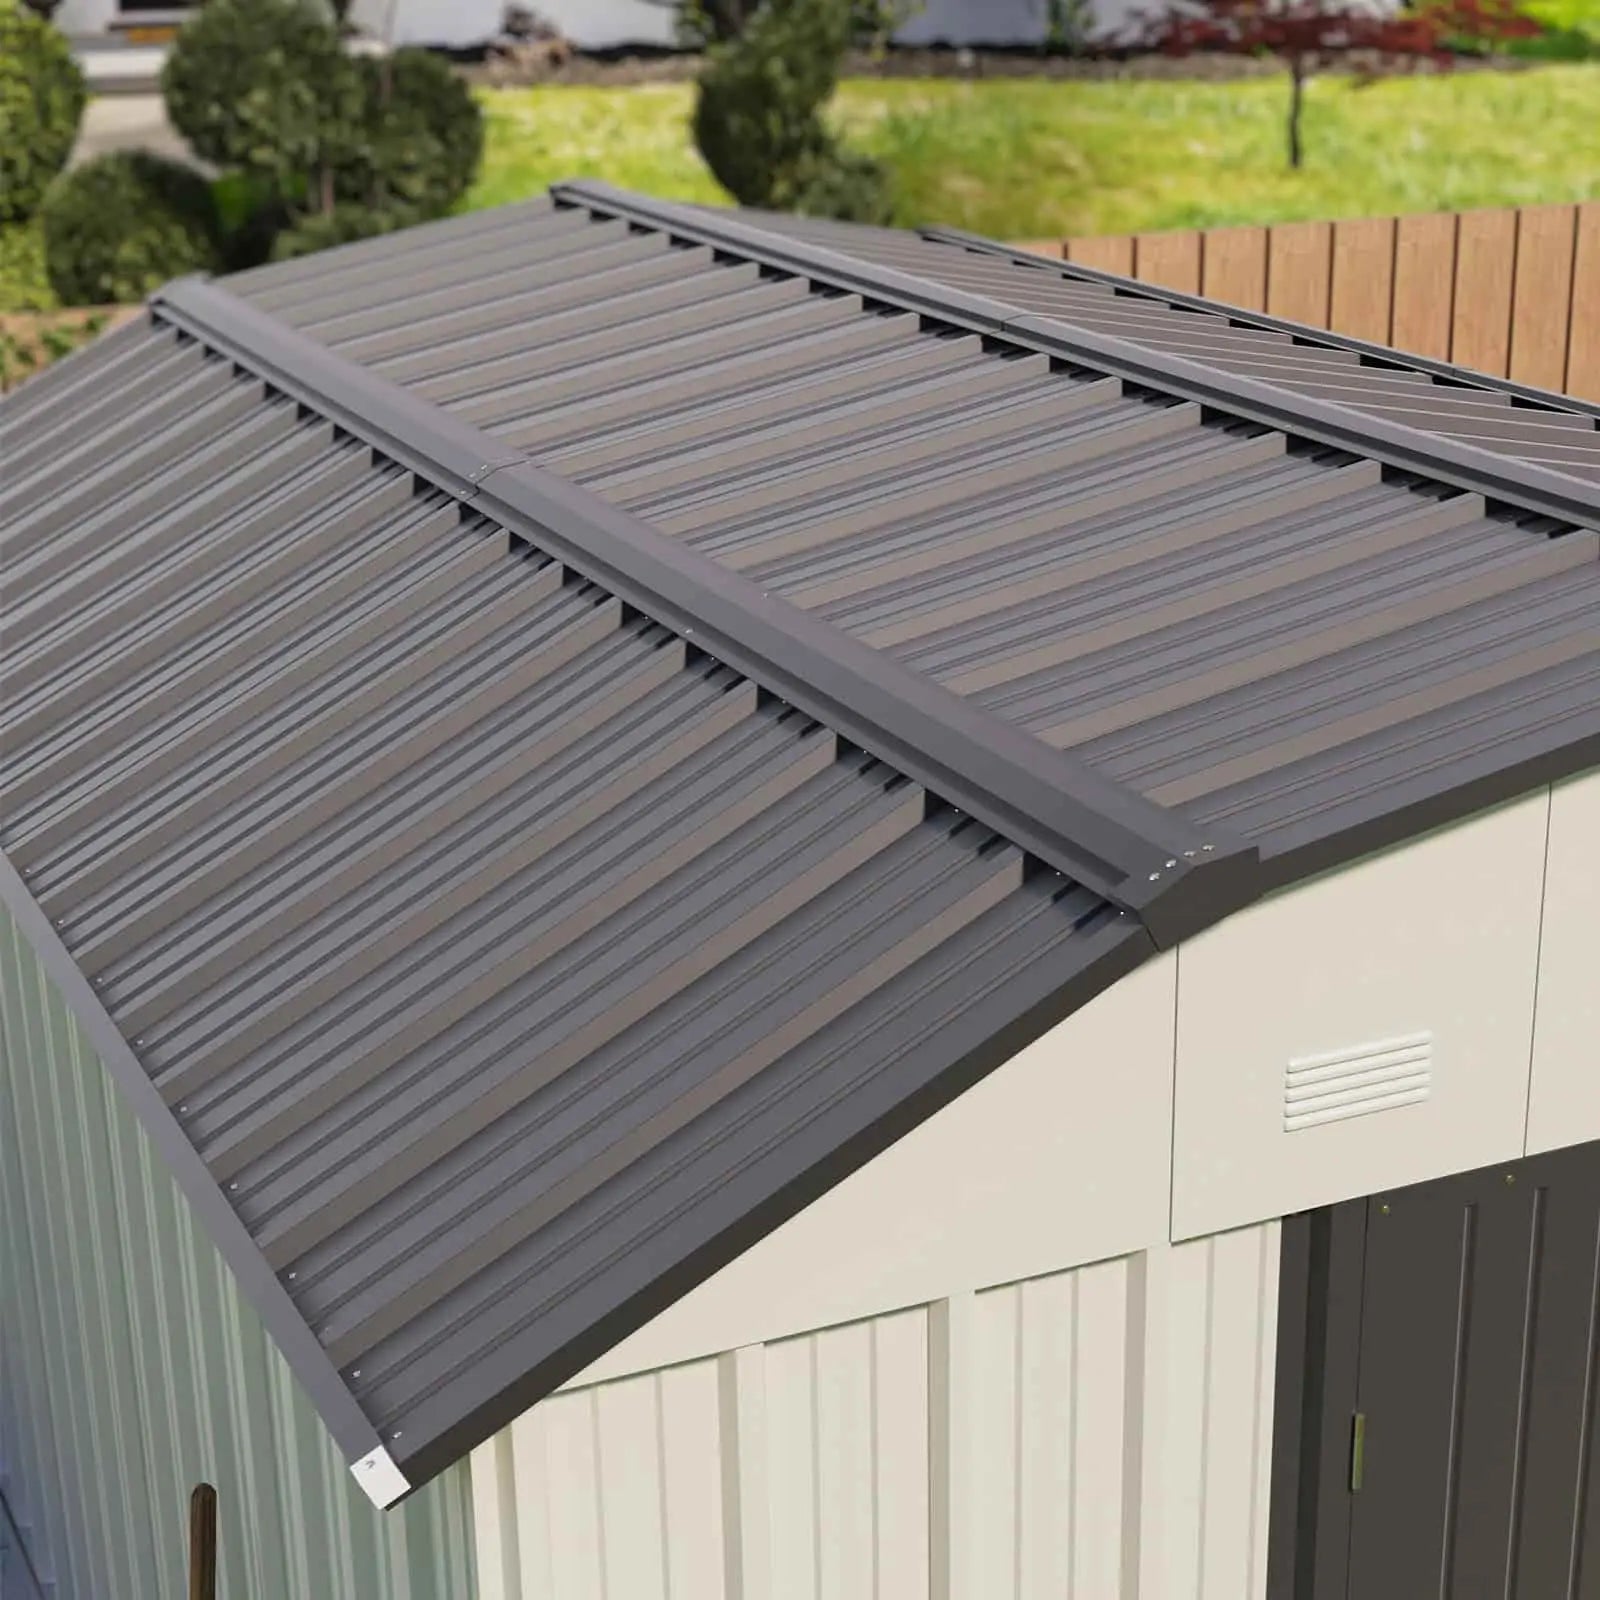 Patiowell 10x12 Metal Shed-Arched Roof